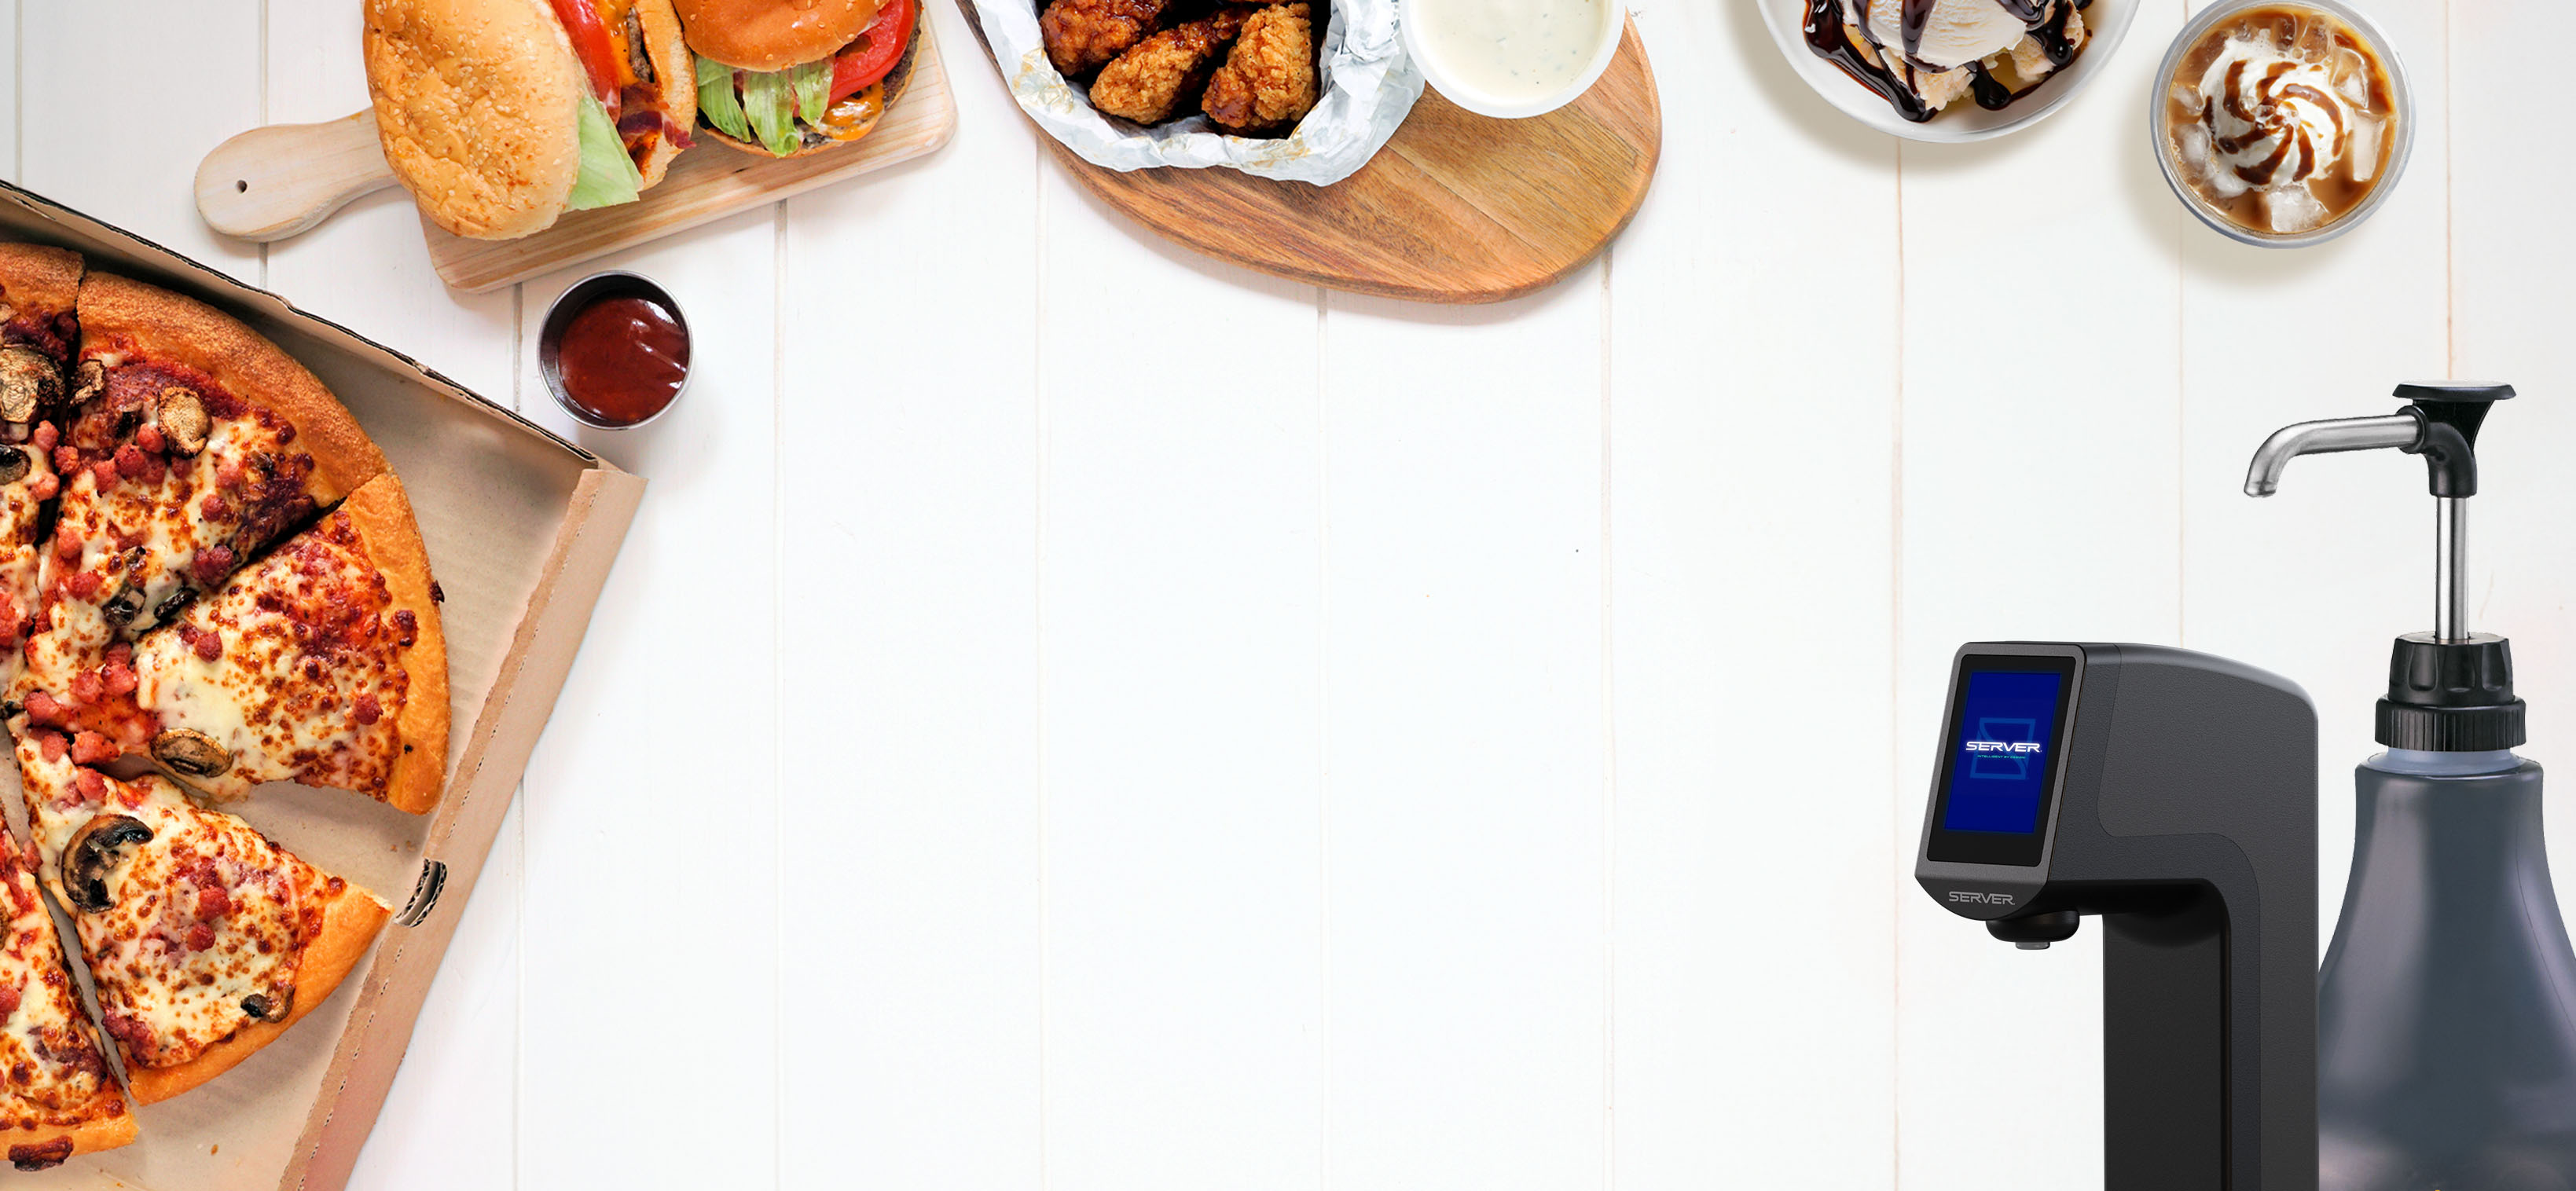 food displayed on a white washed background